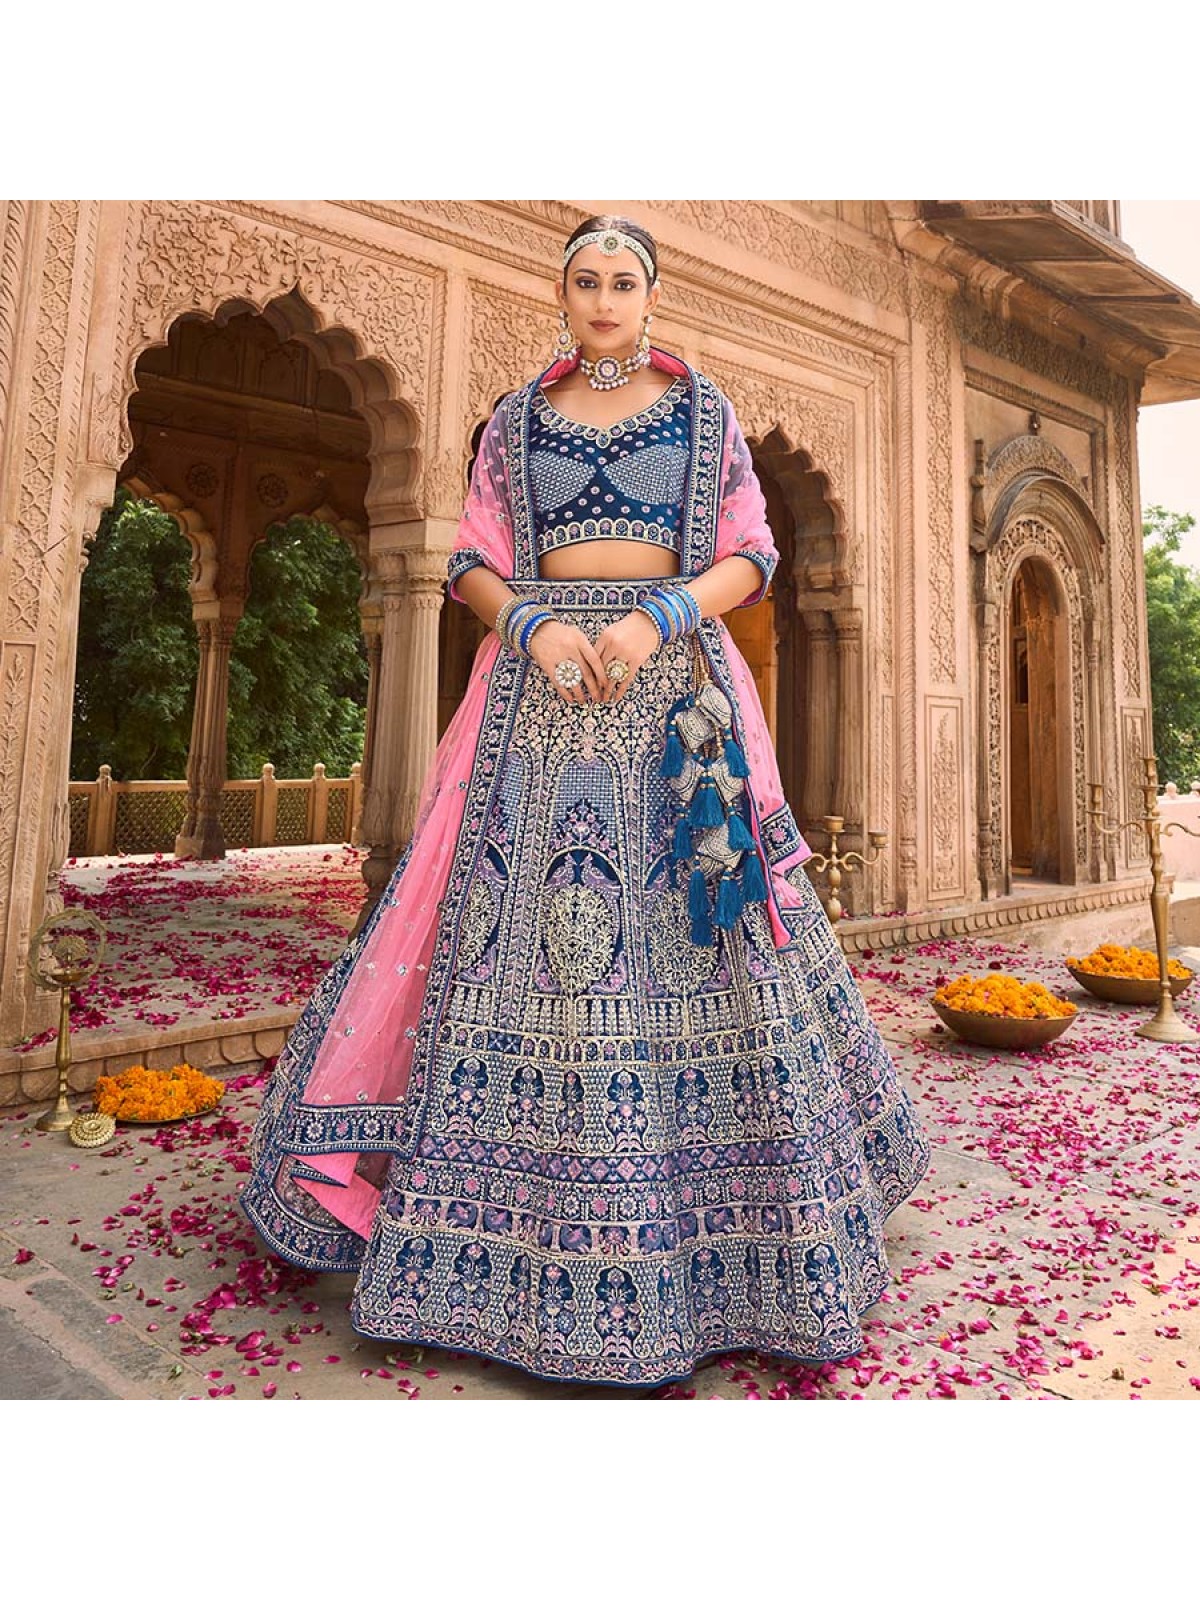 27 Peacock Design Lehengas For The Royalty In You | Indian bridal outfits,  Indian bridal wear red, Indian fashion trends